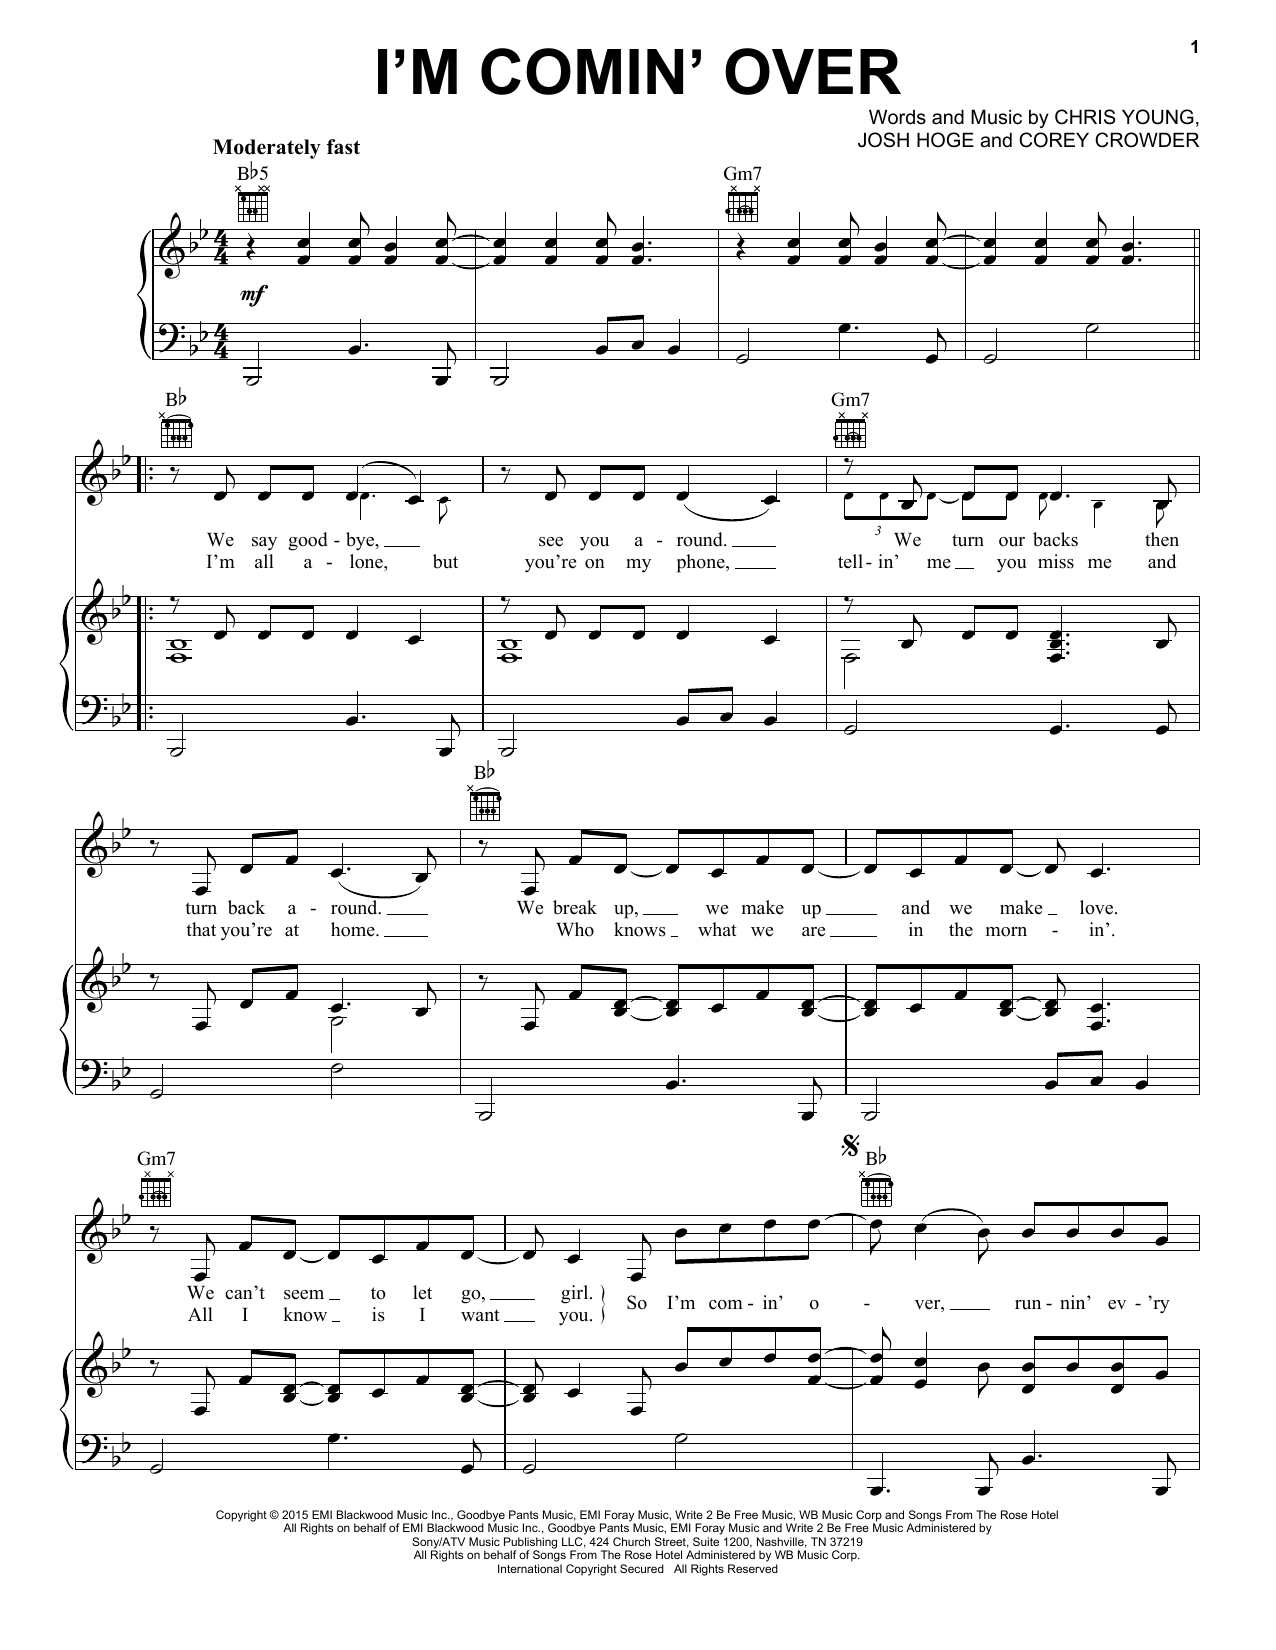 Download Chris Young I'm Comin' Over Sheet Music